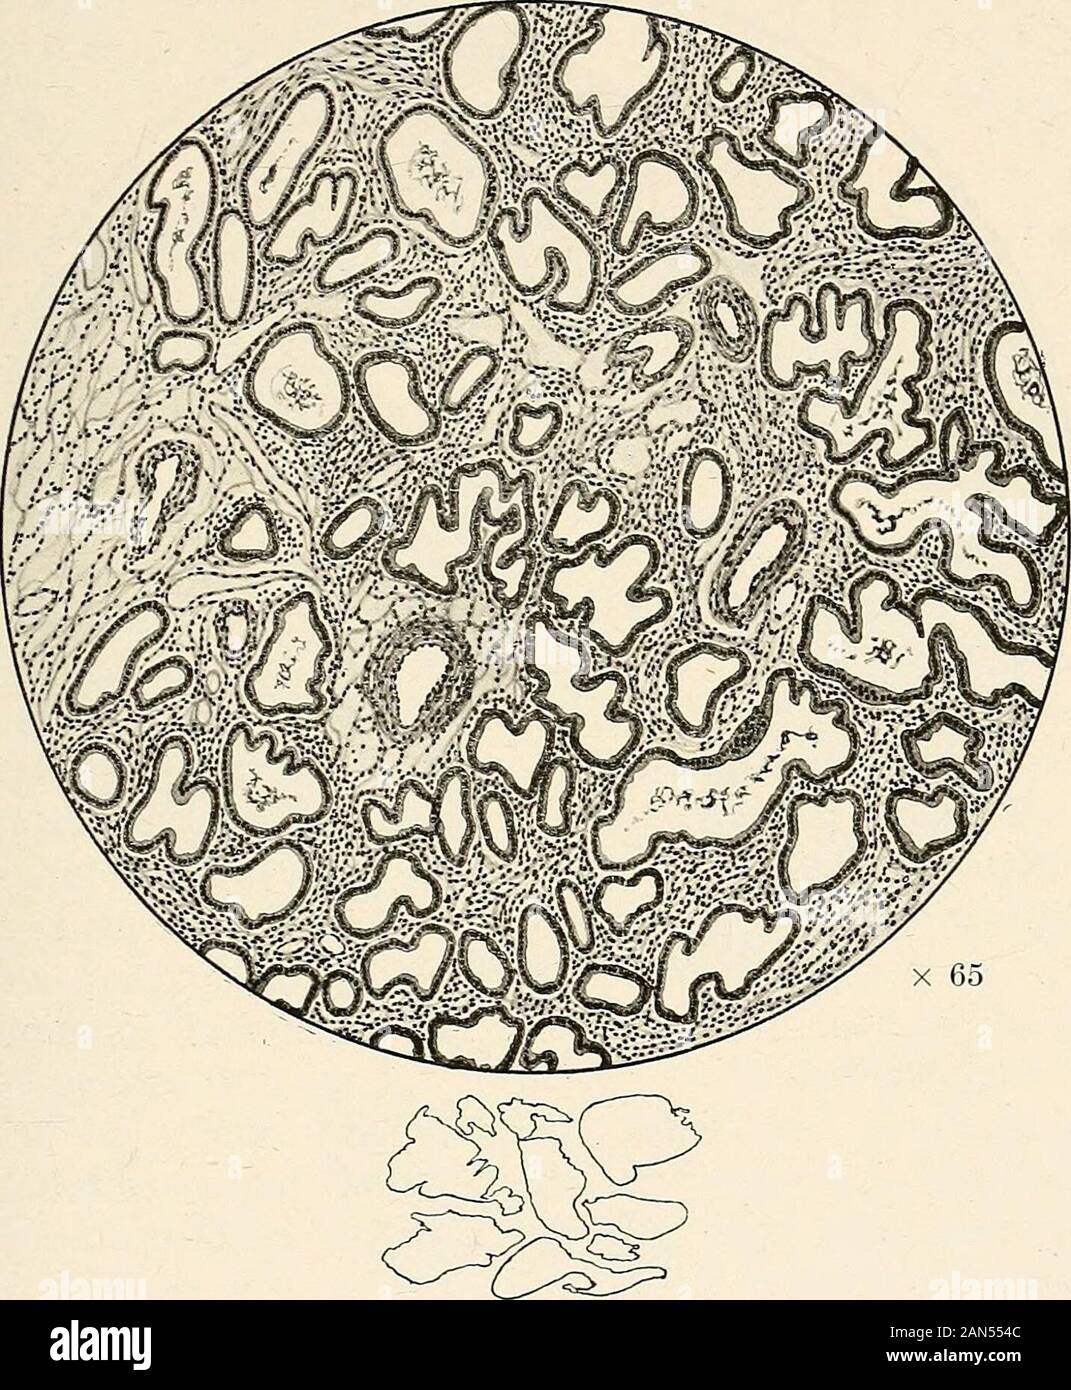 Gynaecology for students and practitioners . be distinguished :(1) diffuse-fungous ; (2) polypoidal-cystic. (1) Diffuse-fungous Form. In this form of endometritis themucous membrane is uniformly thickened and tends to the formationof polypoidal masses. Histologically it combines hypertrophy ofgland-tissue with extreme hyperplasia of the stroma {see Fig. 190).The glands are as large as those seen in the premenstrual stage, whilstthe stroma is as dense as it is in chronic interstitial endometritis. Itis probably a true inflammatory condition, and the following featureslend support to this view. Stock Photo